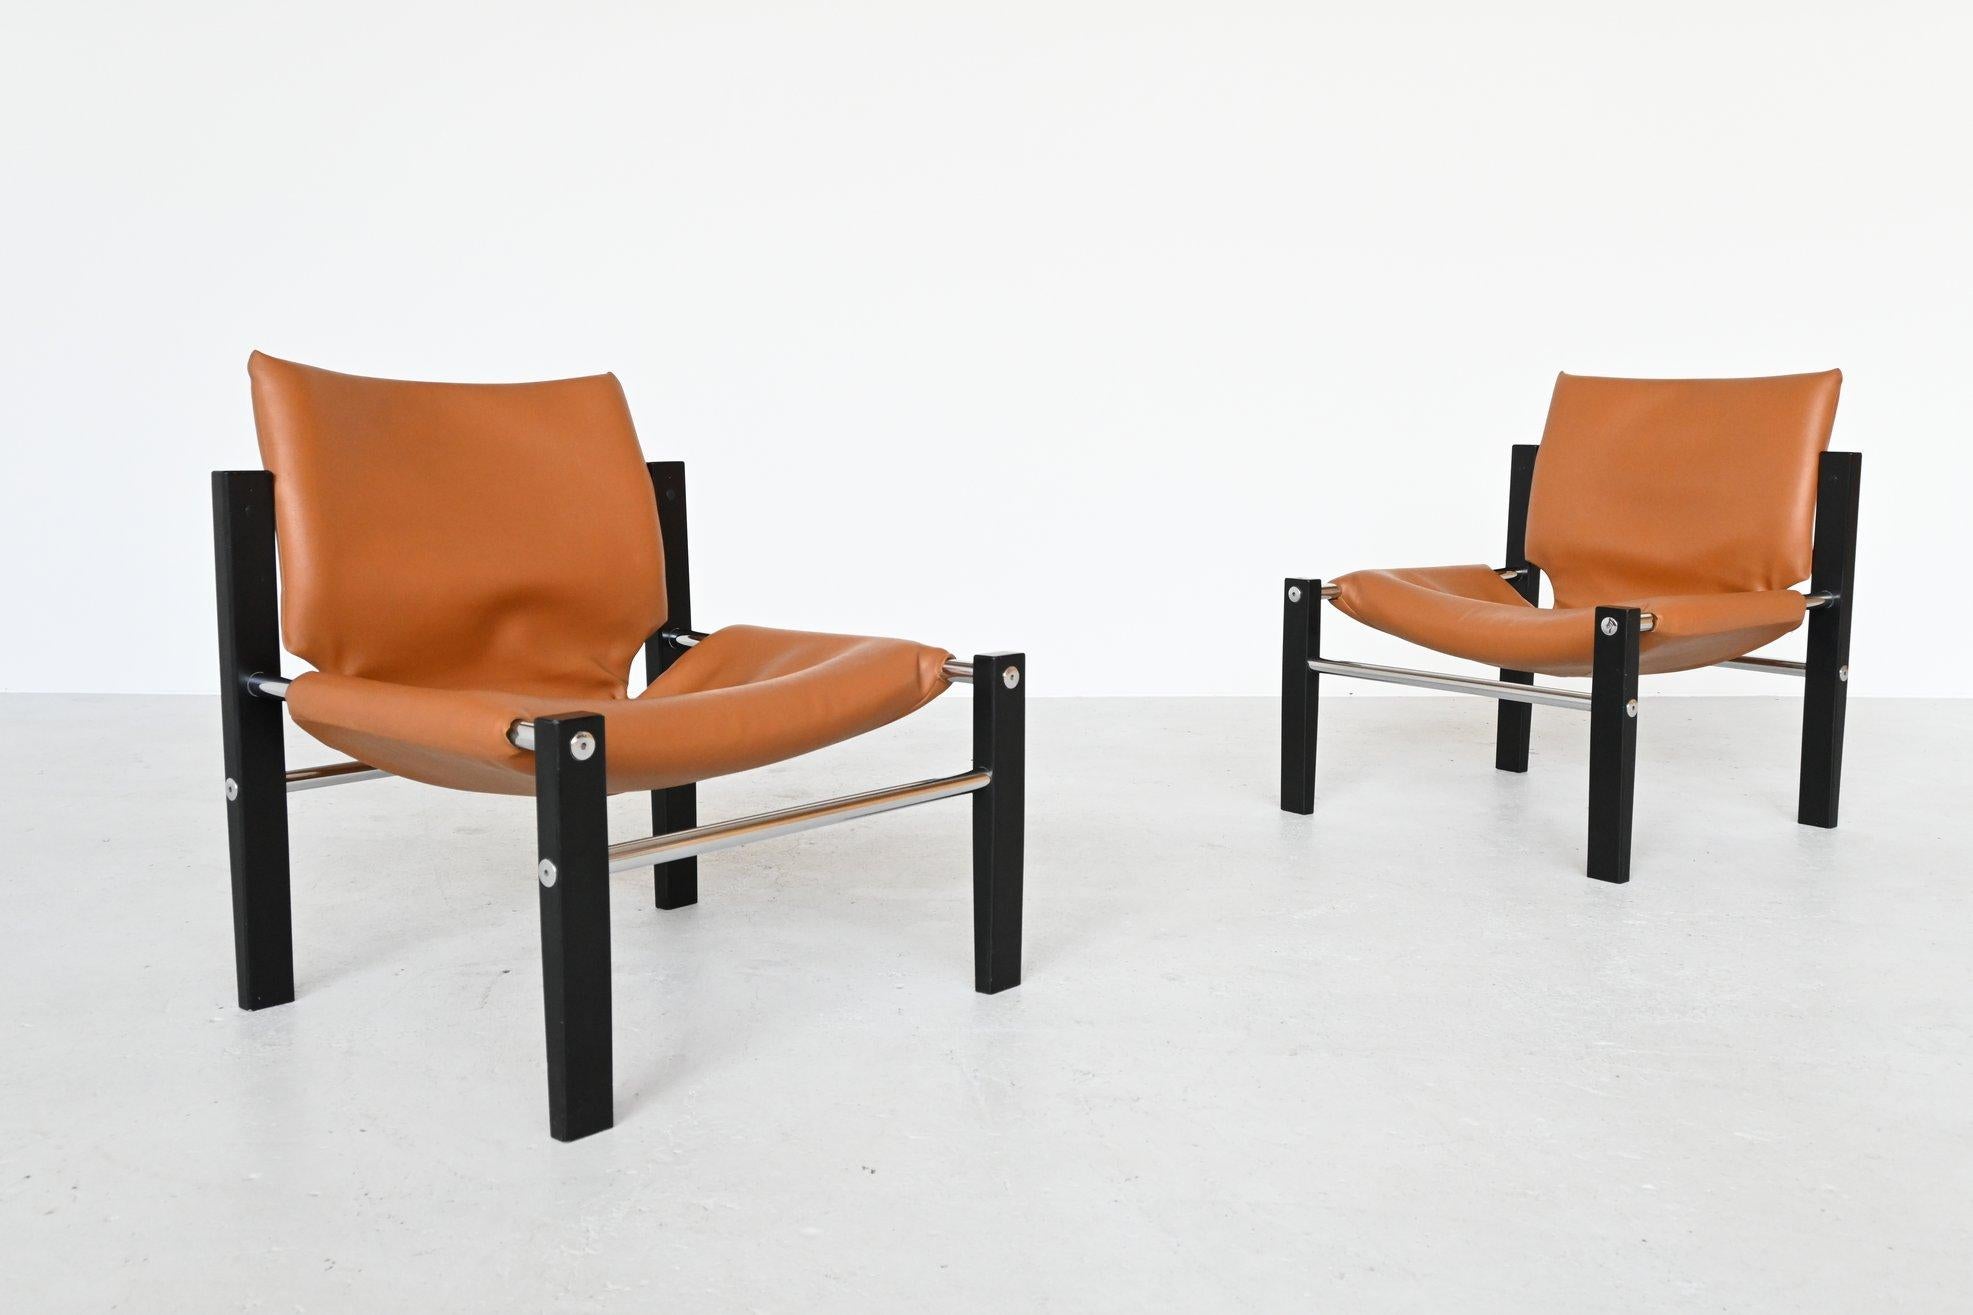 Stunning safari Chelsea lounge chairs designed by Maurice Burke for Arkana, Bath England 1970s. These chairs fall right in line with the designs of Arne Norell for Sirocco and Kaare Klint. These lounge chairs are upholstered in a camel leather and